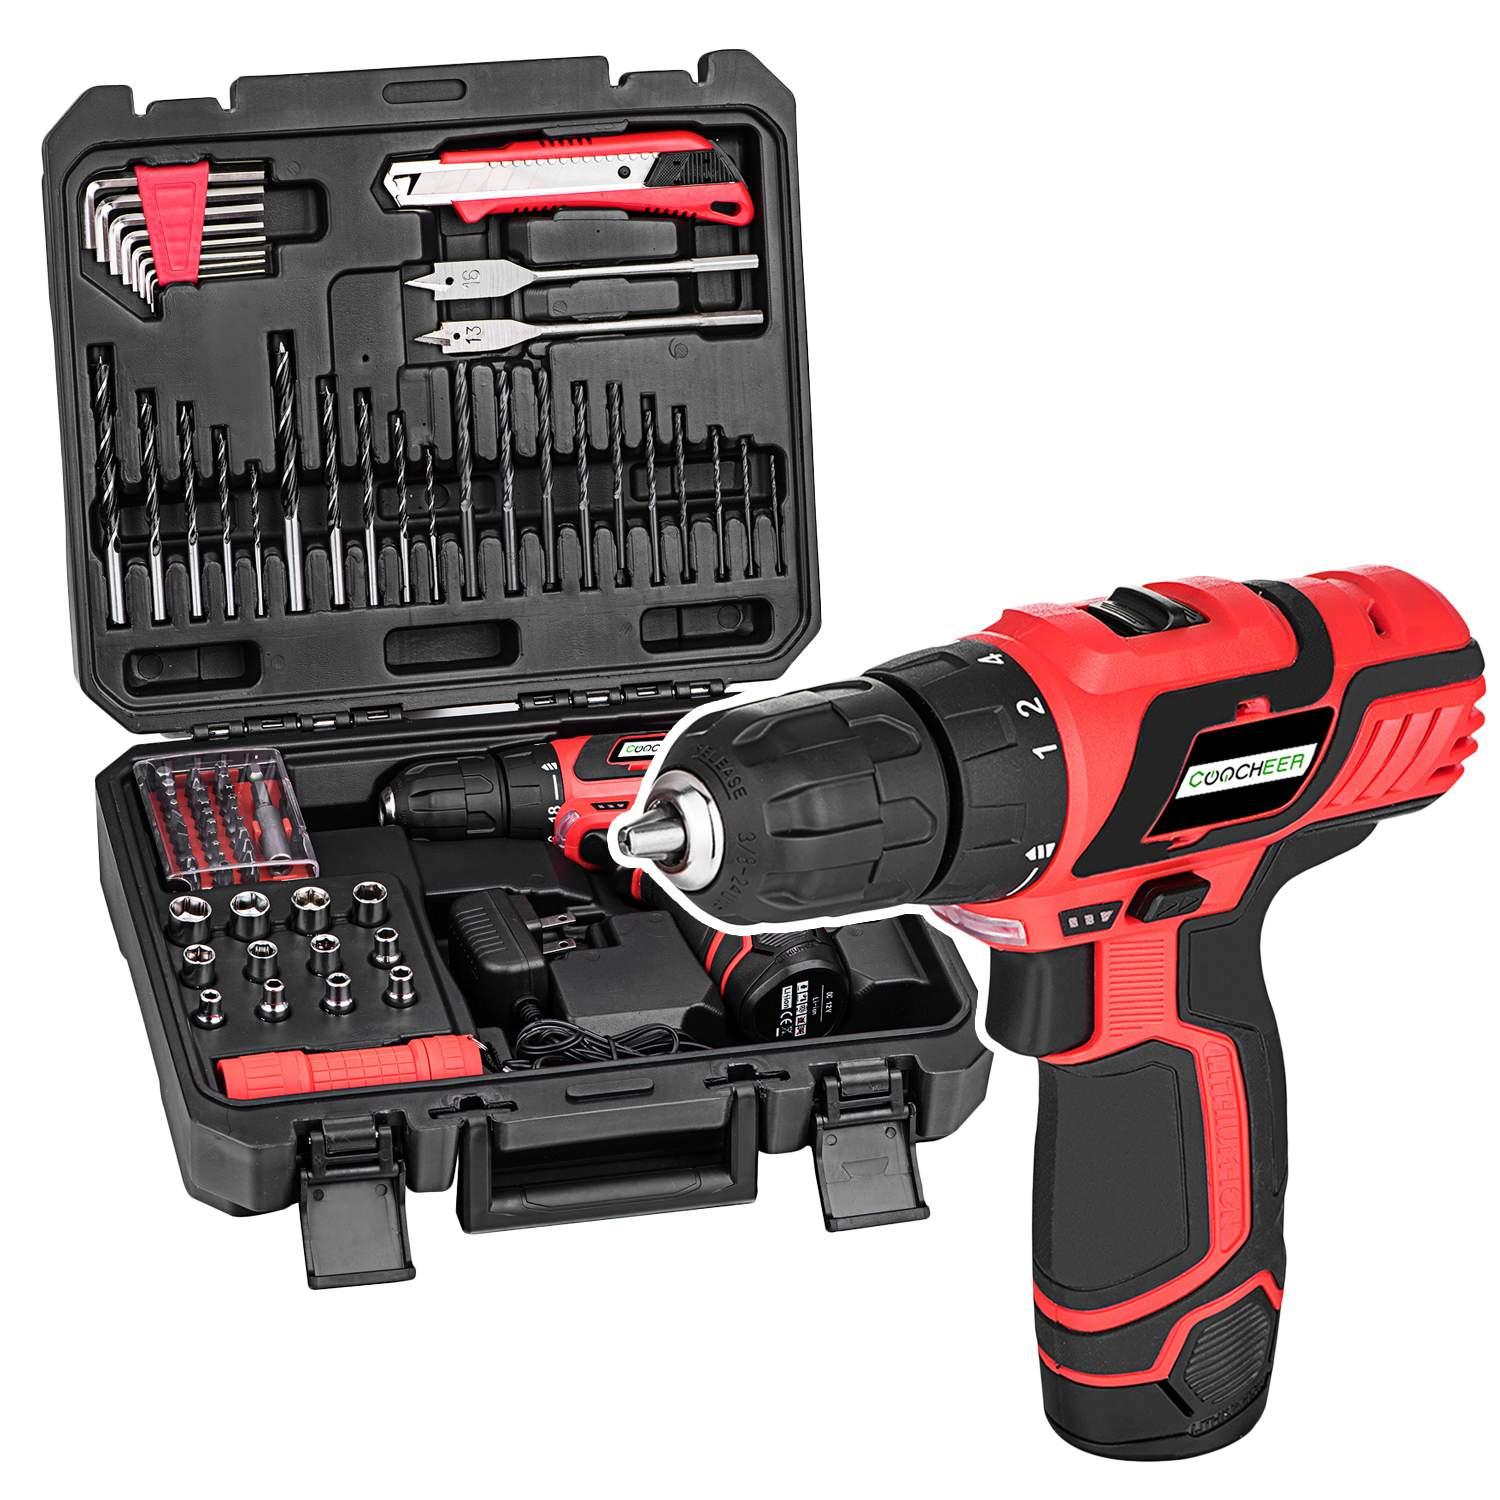 Combi Cordless Impact Drill 18+1 Torque Setting 21V Max 1400RPM 2-Speed Driver Built in LED Work Light 29-Pieces Power Drill Set with 2 Lithium Ion Batteries Charger Tool Case for DIY/Workshop/Garage 